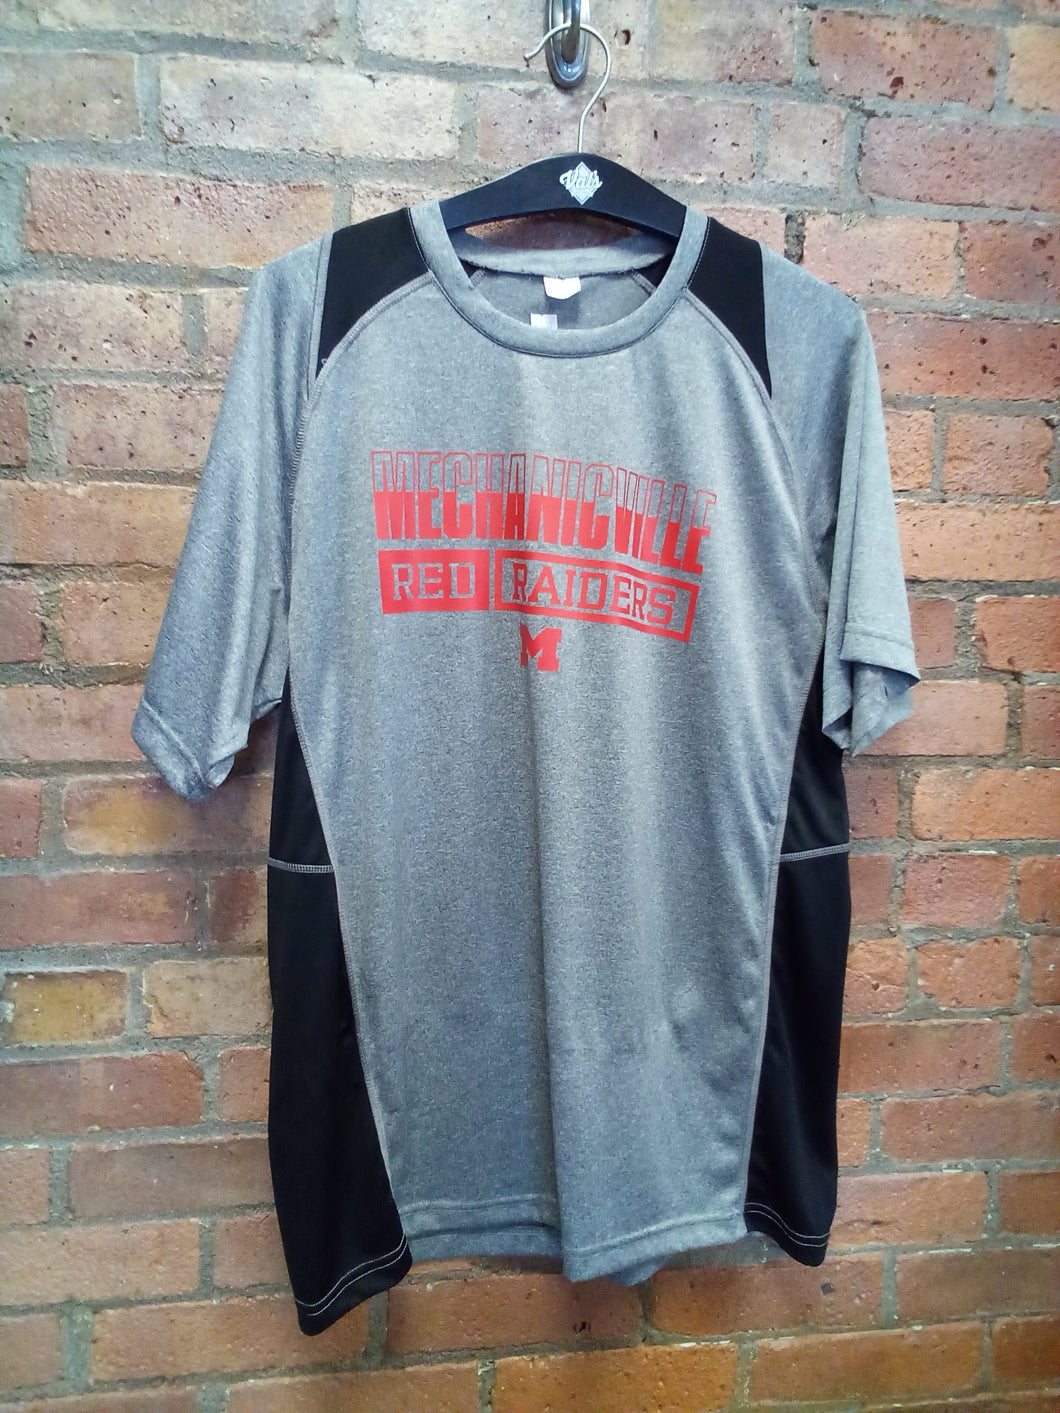 CLEARANCE - Mechanicville Red Raiders Colorblock Moisture Wicking T-Shirt - Size Large